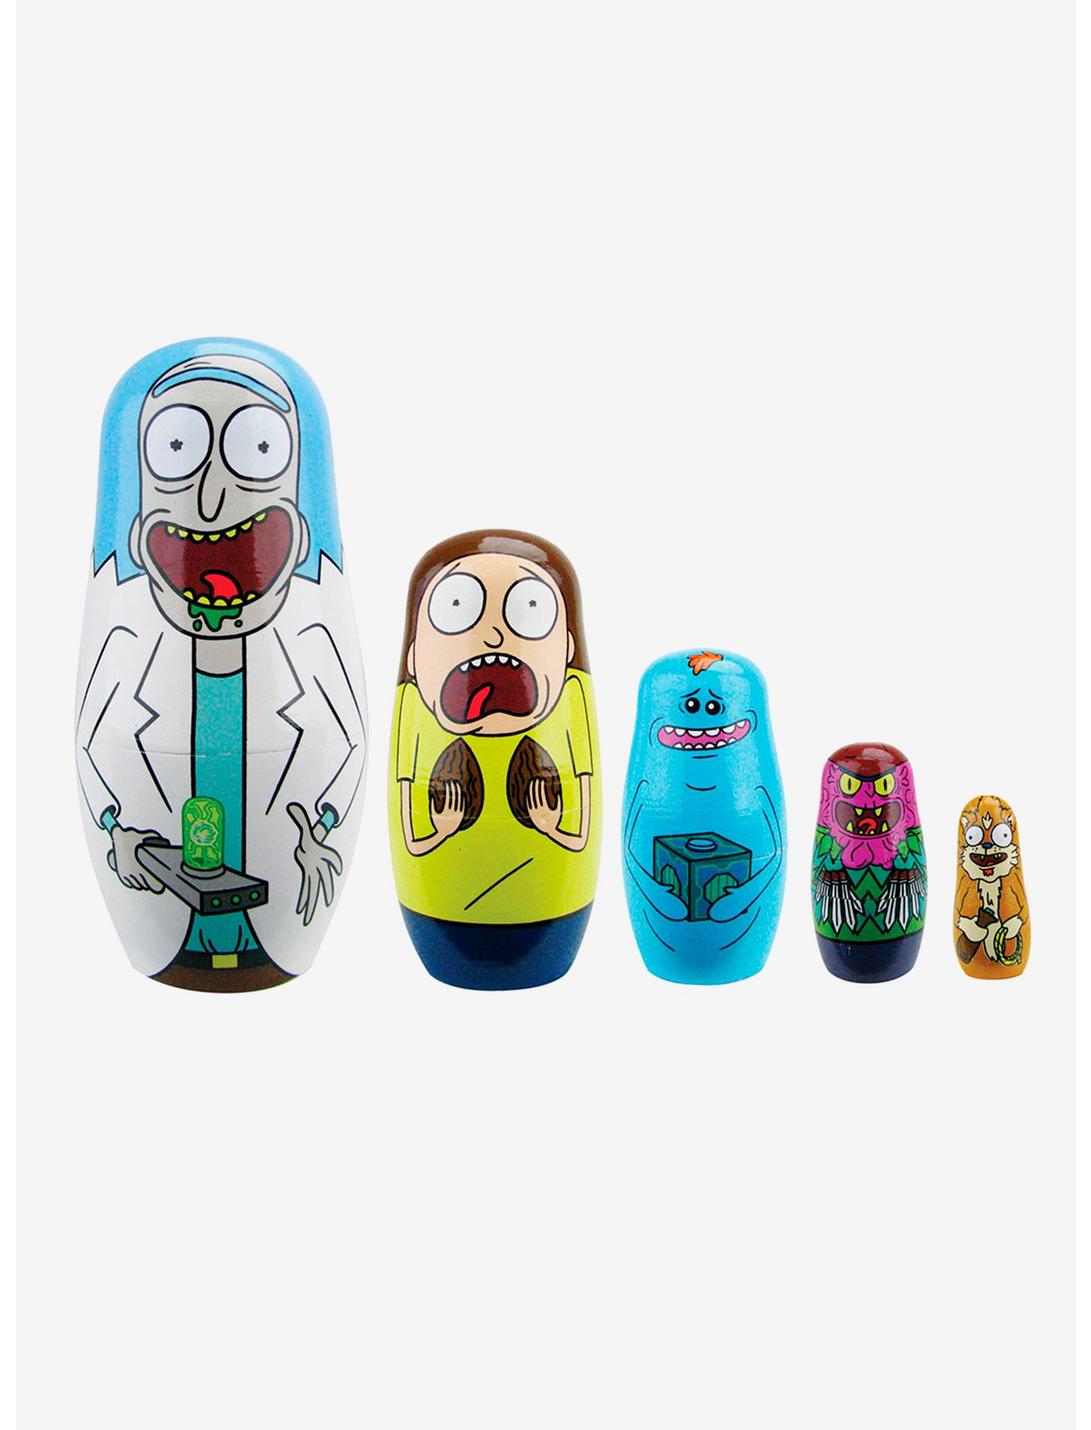 Rick And Morty Wooden Nesting Dolls Hot Topic Exclusive, , hi-res